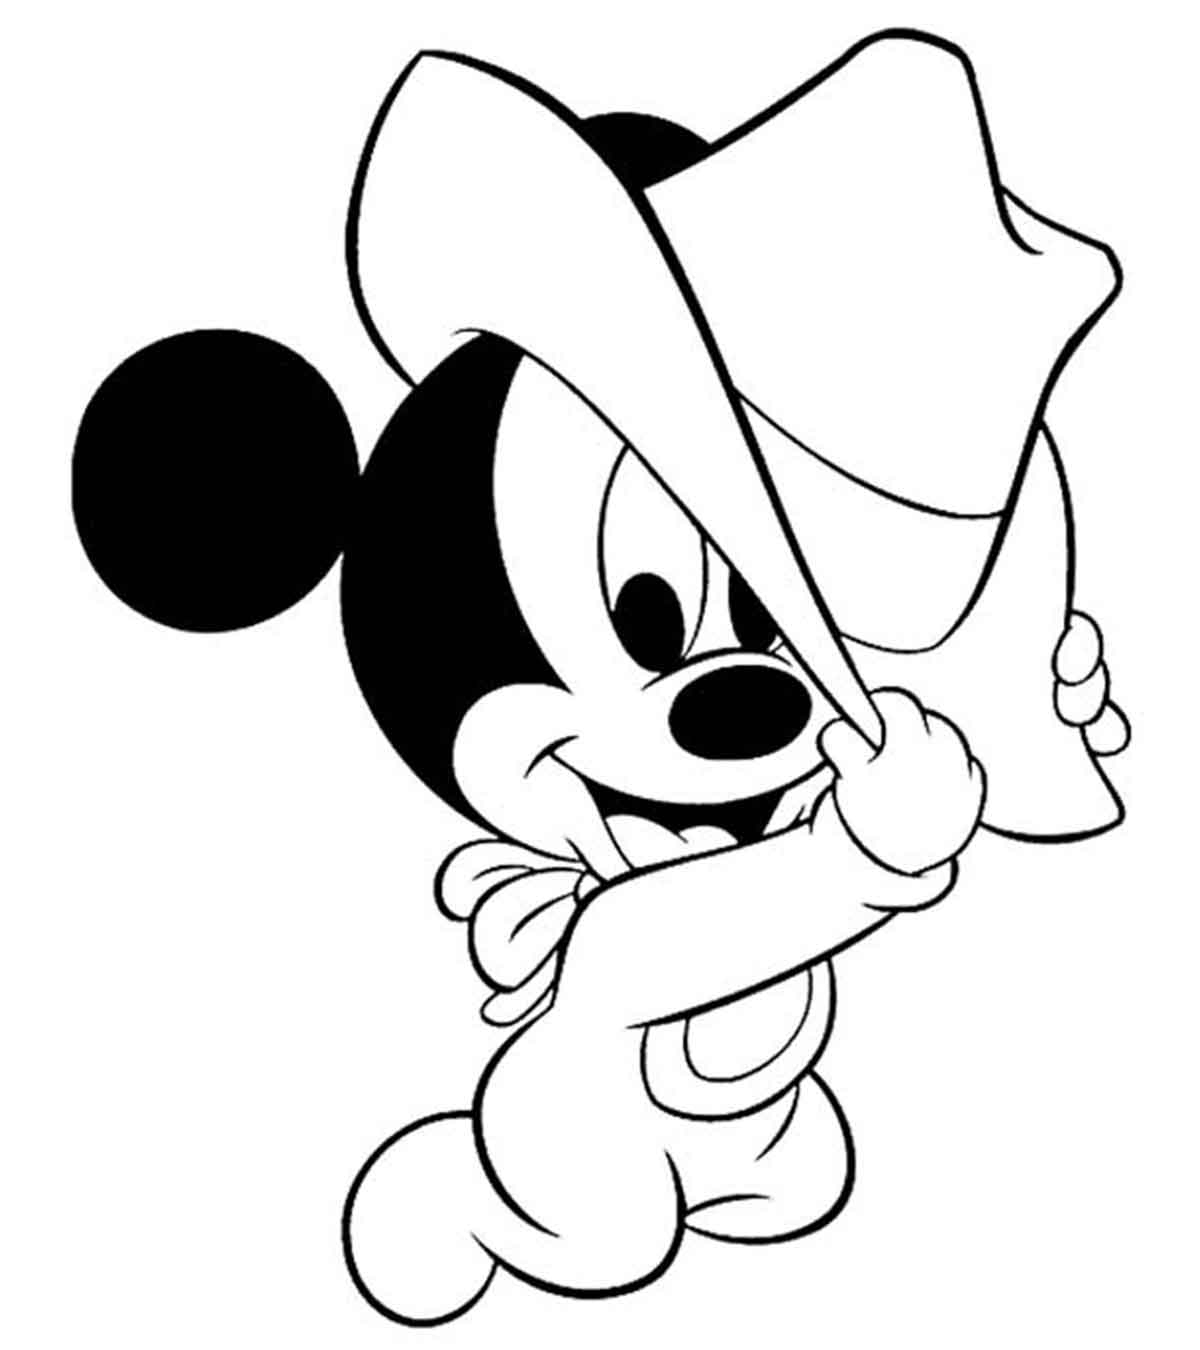 Mickey Mouse And Minnie Coloring Pages Top 75 Free Printable Mickey Mouse Coloring Pages Online